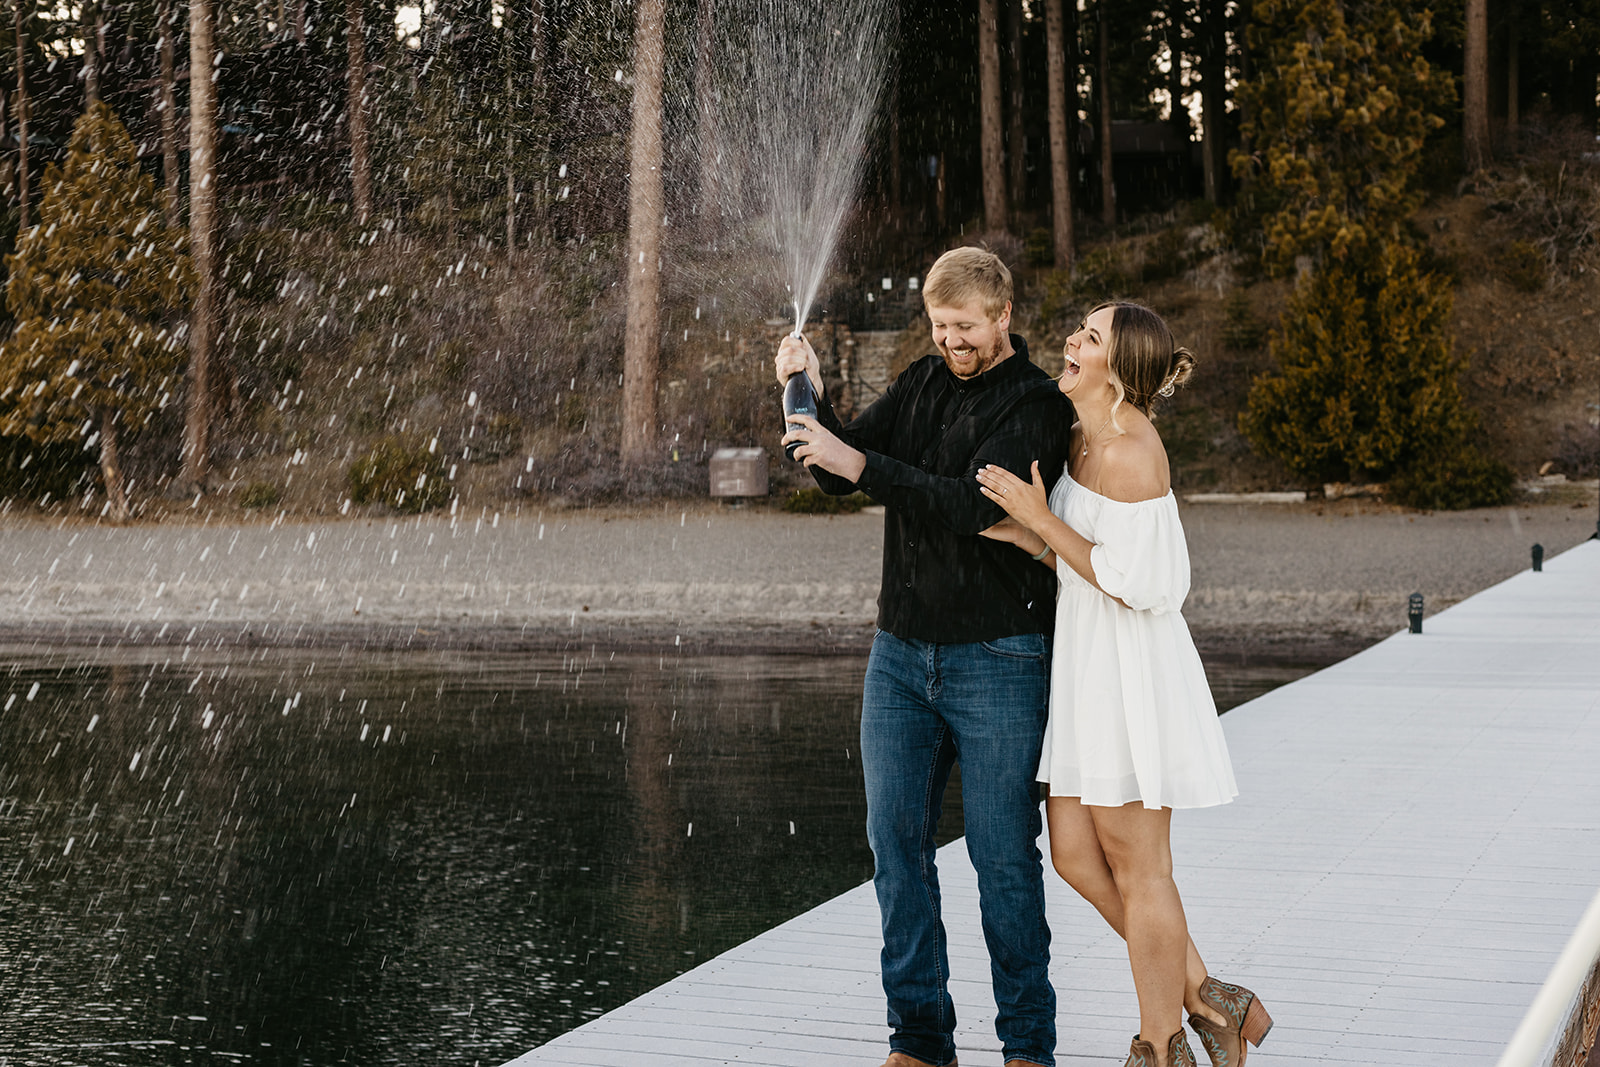 Dani Rawson Photo, a Tahoe Engagement Photographer, shares take on a Dollar Point Engagement Session in Lake Tahoe, California